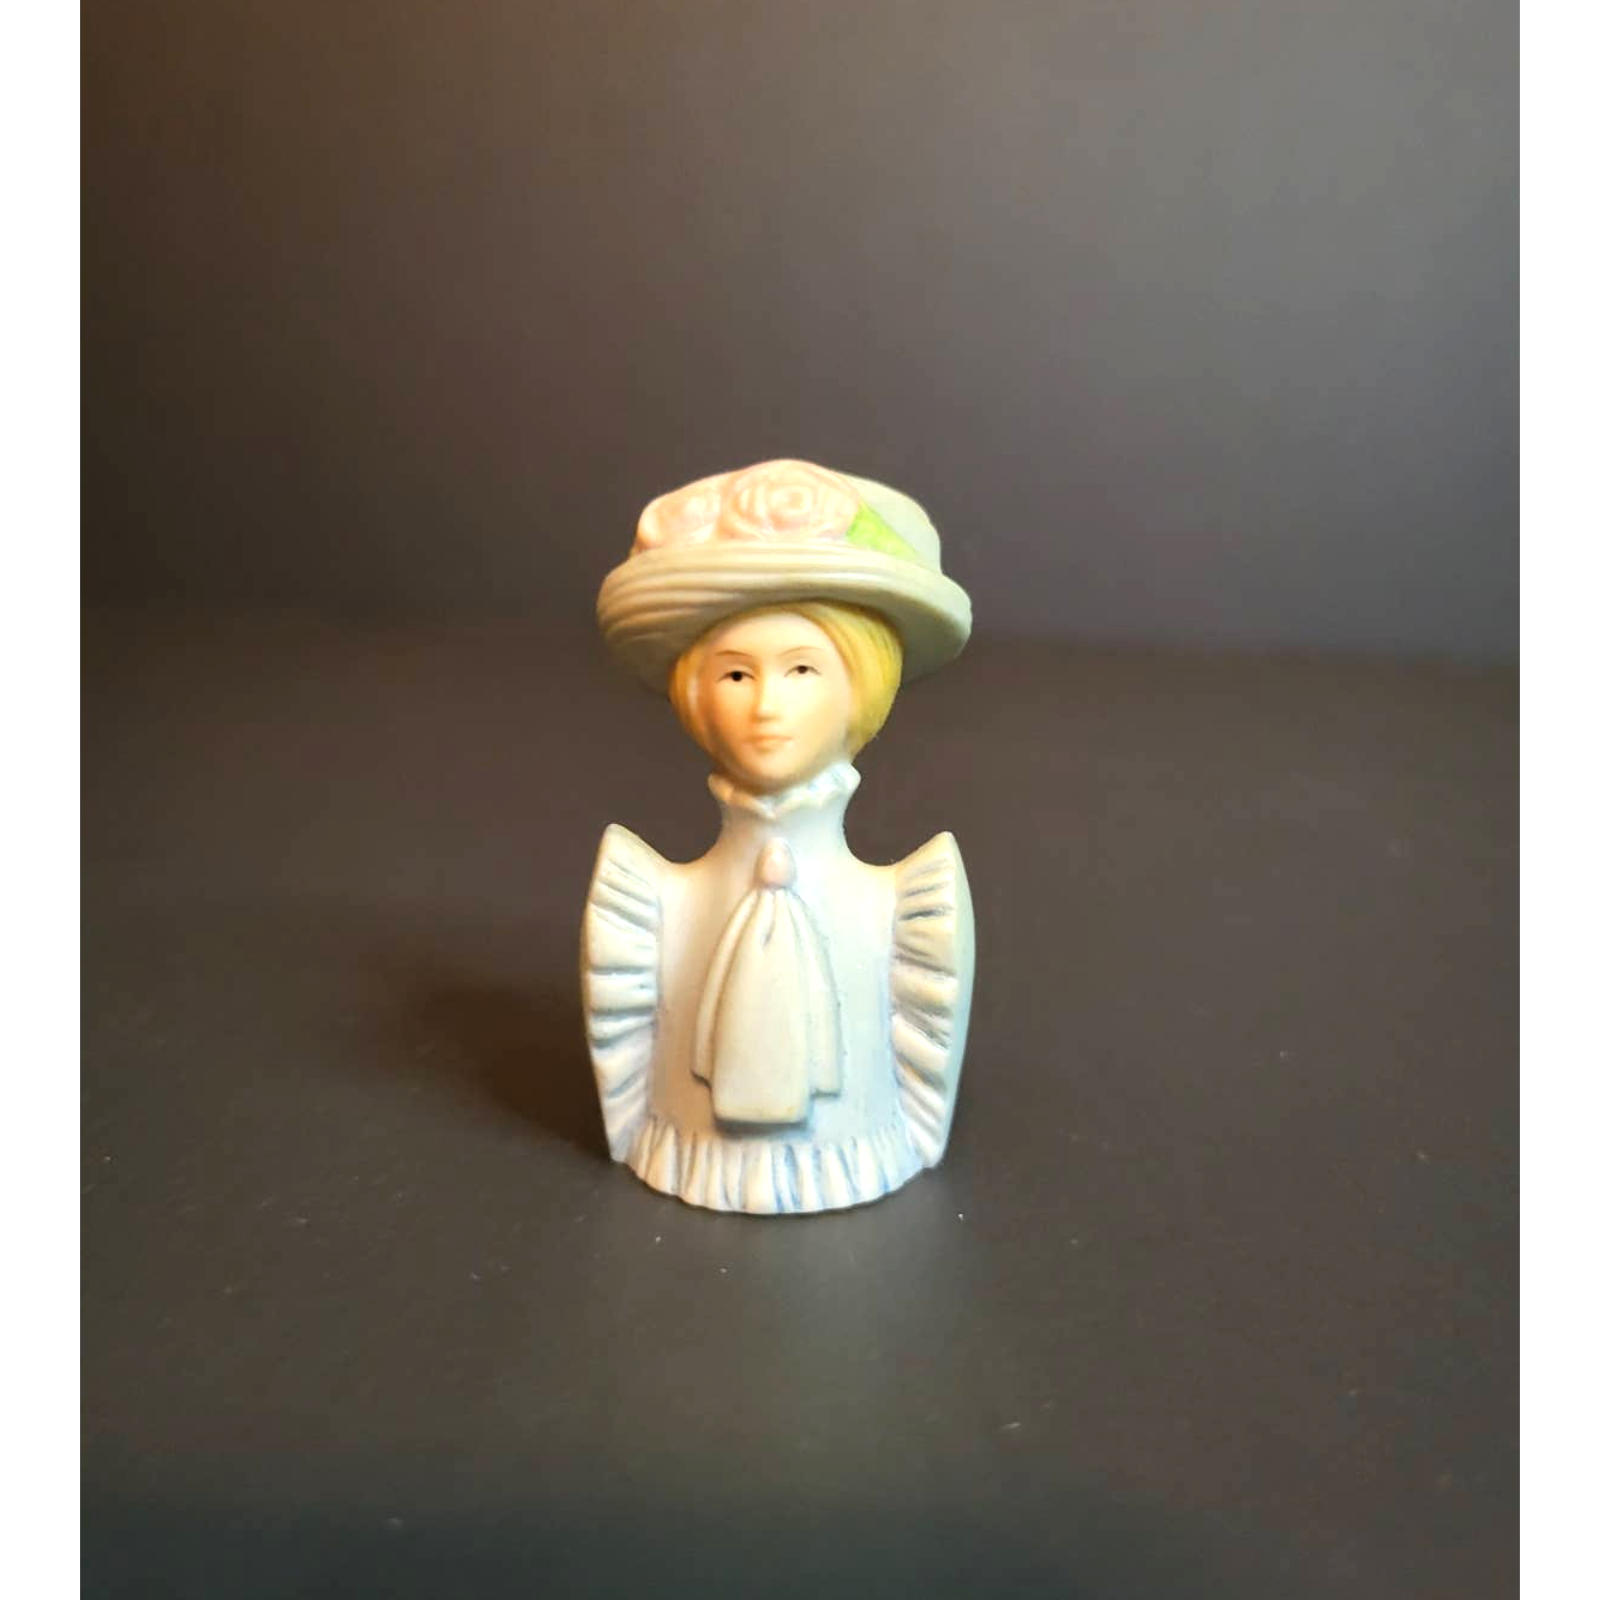 Primary image for Vintage 1982 AVON Victorian American Fashion Lady Porcelain Thimble Collectible